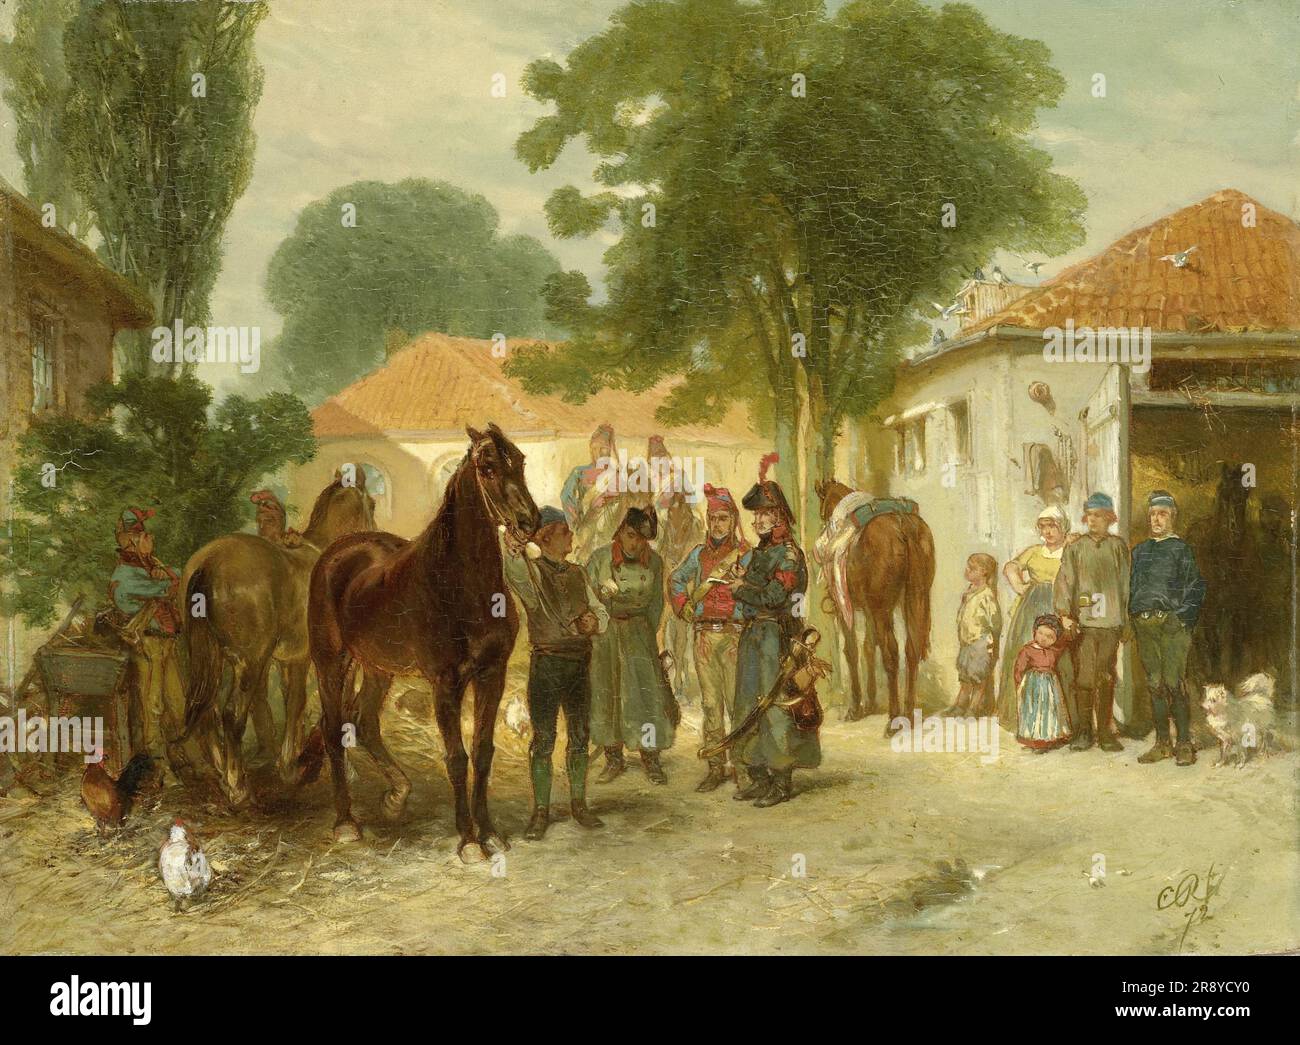 The requisition, 1872. Soldiers with horses belonging to a farming family. Stock Photo